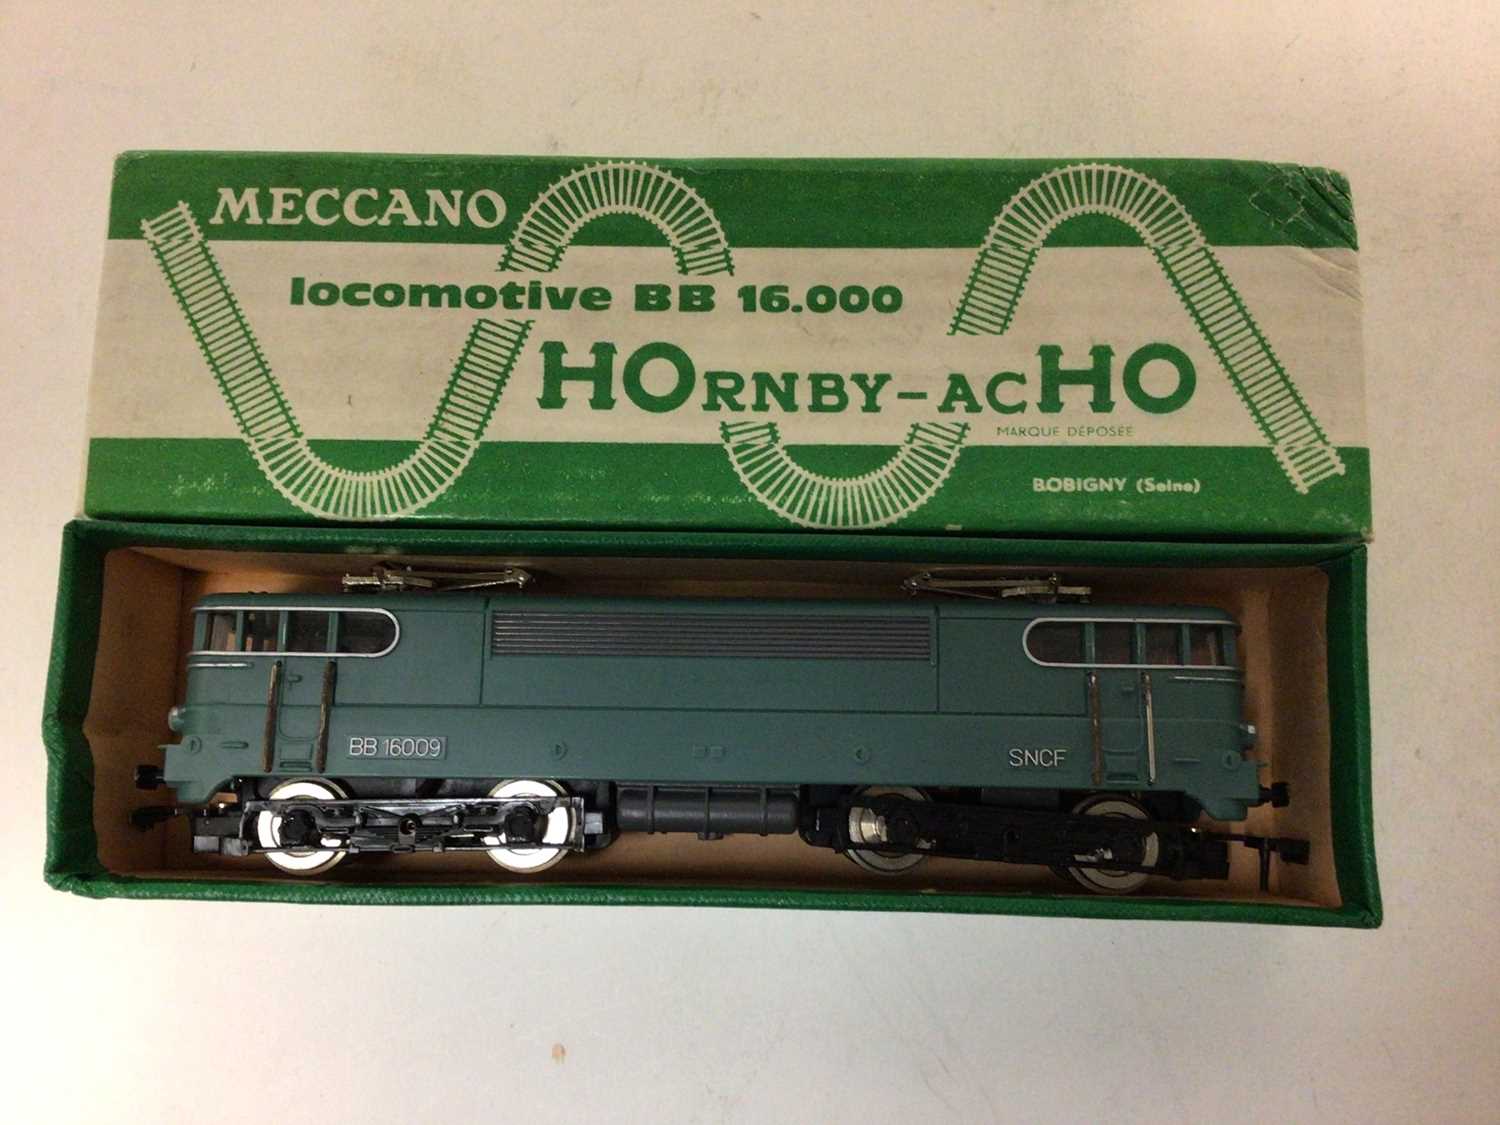 Meccano HOrnby acHO locomotives including SNCF CC 7121 electric locomotive, boxed 6372, SNCF BB 16. - Image 2 of 3